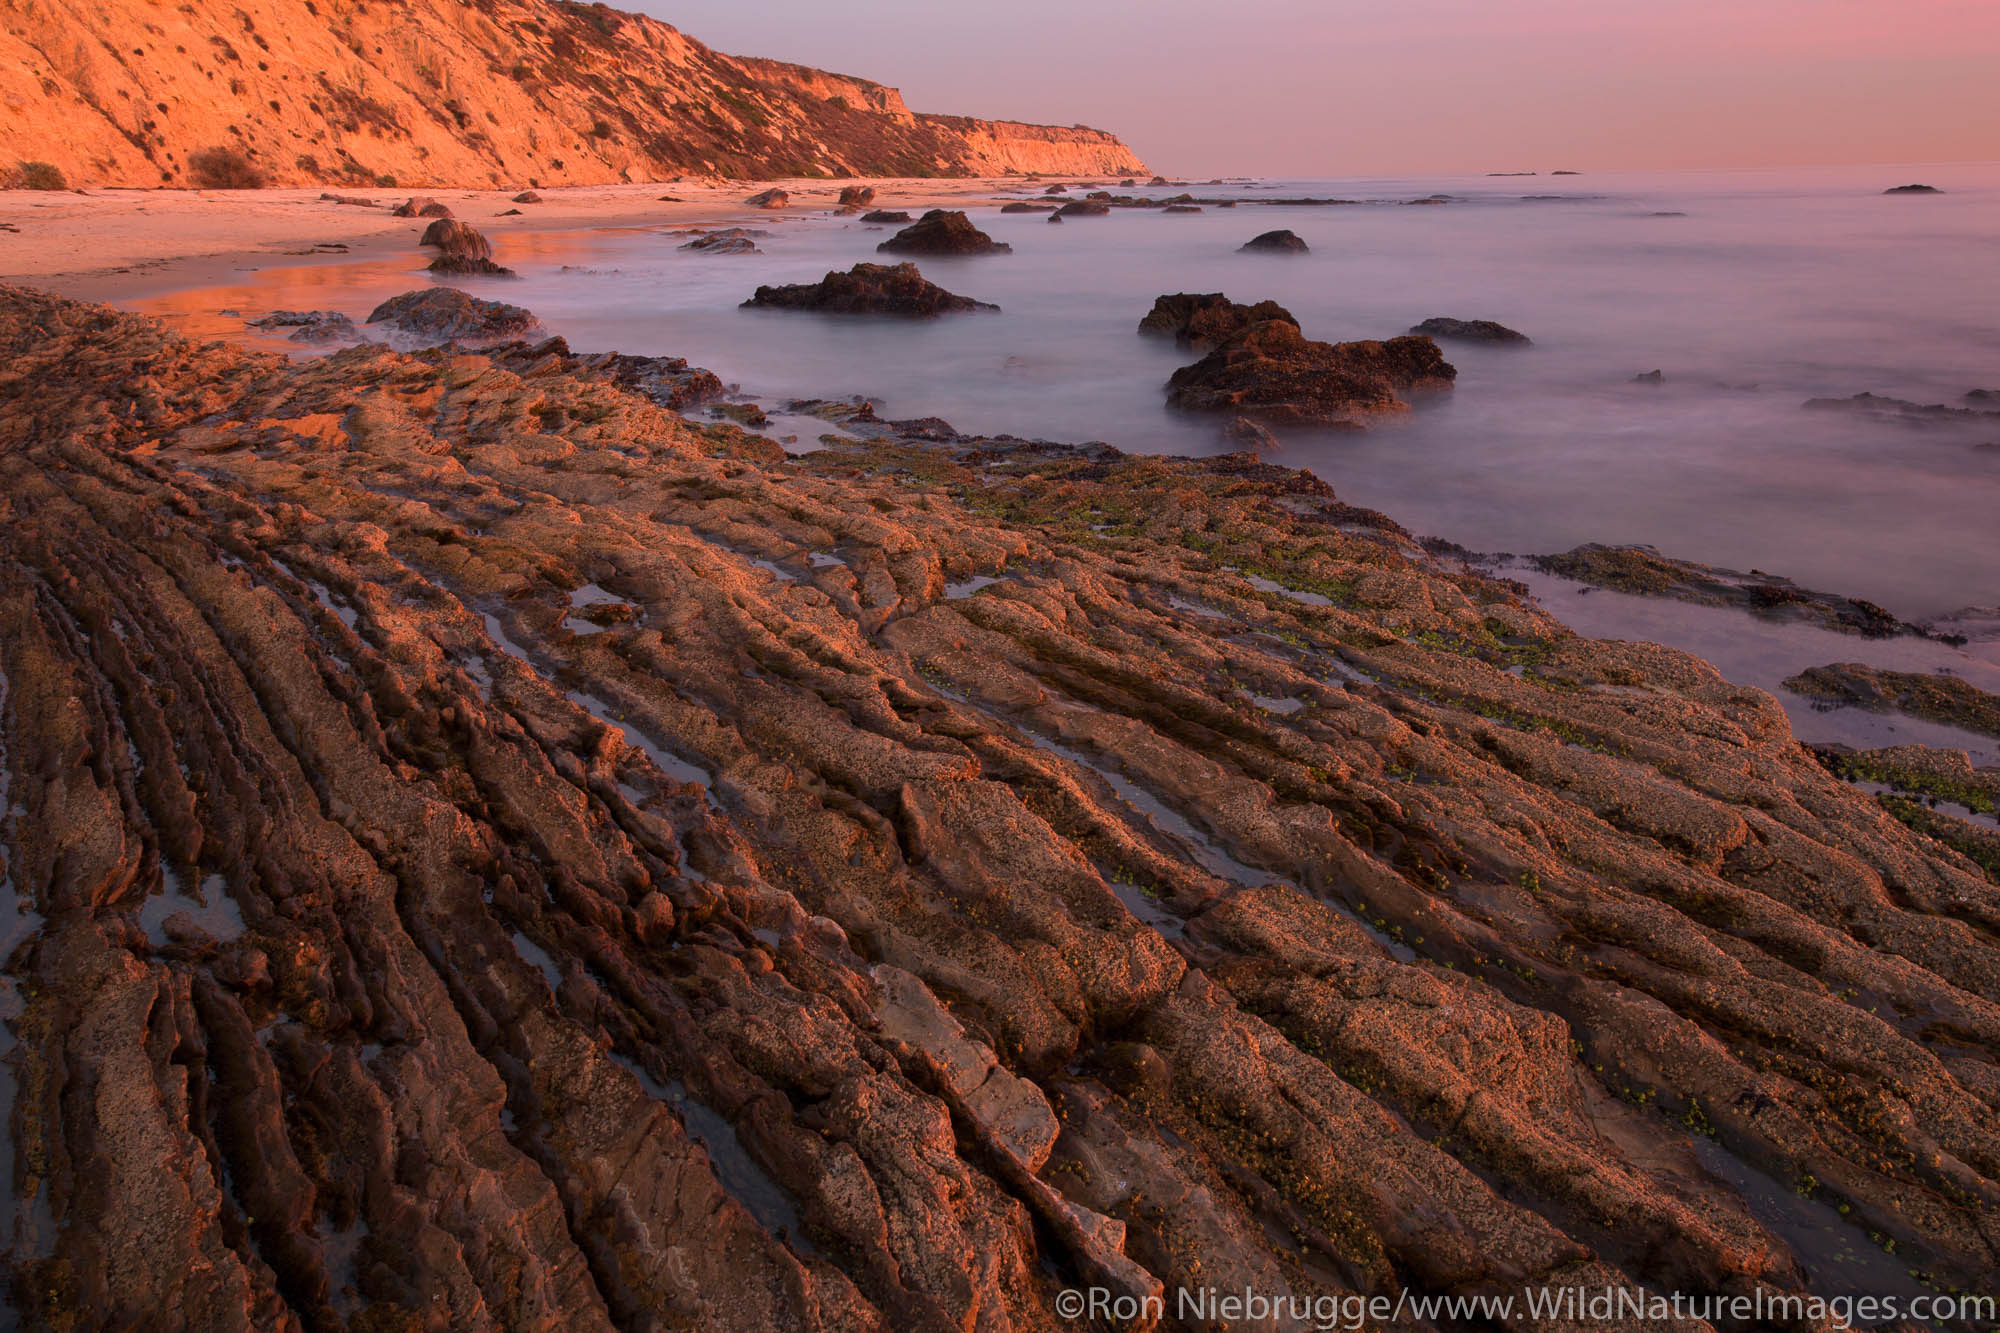 Sunset at Crystal Cove State Park, Newport Beach, Orange County, California.